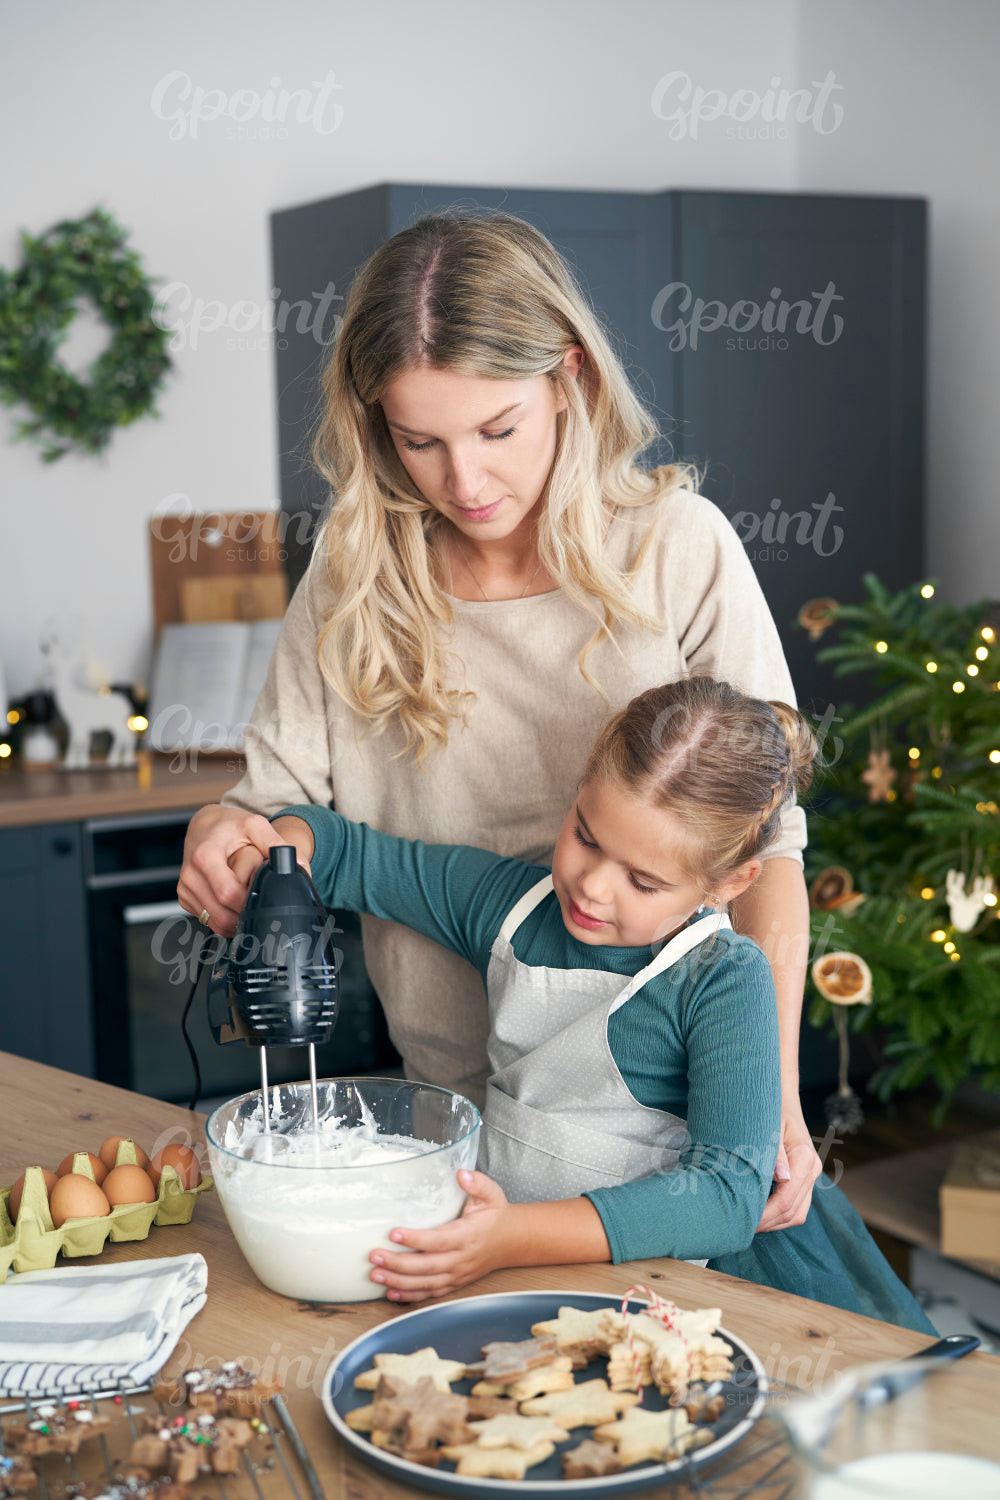 Caucasian mother and daughter preparing baking using electric mixer in the kitchen before Christmas